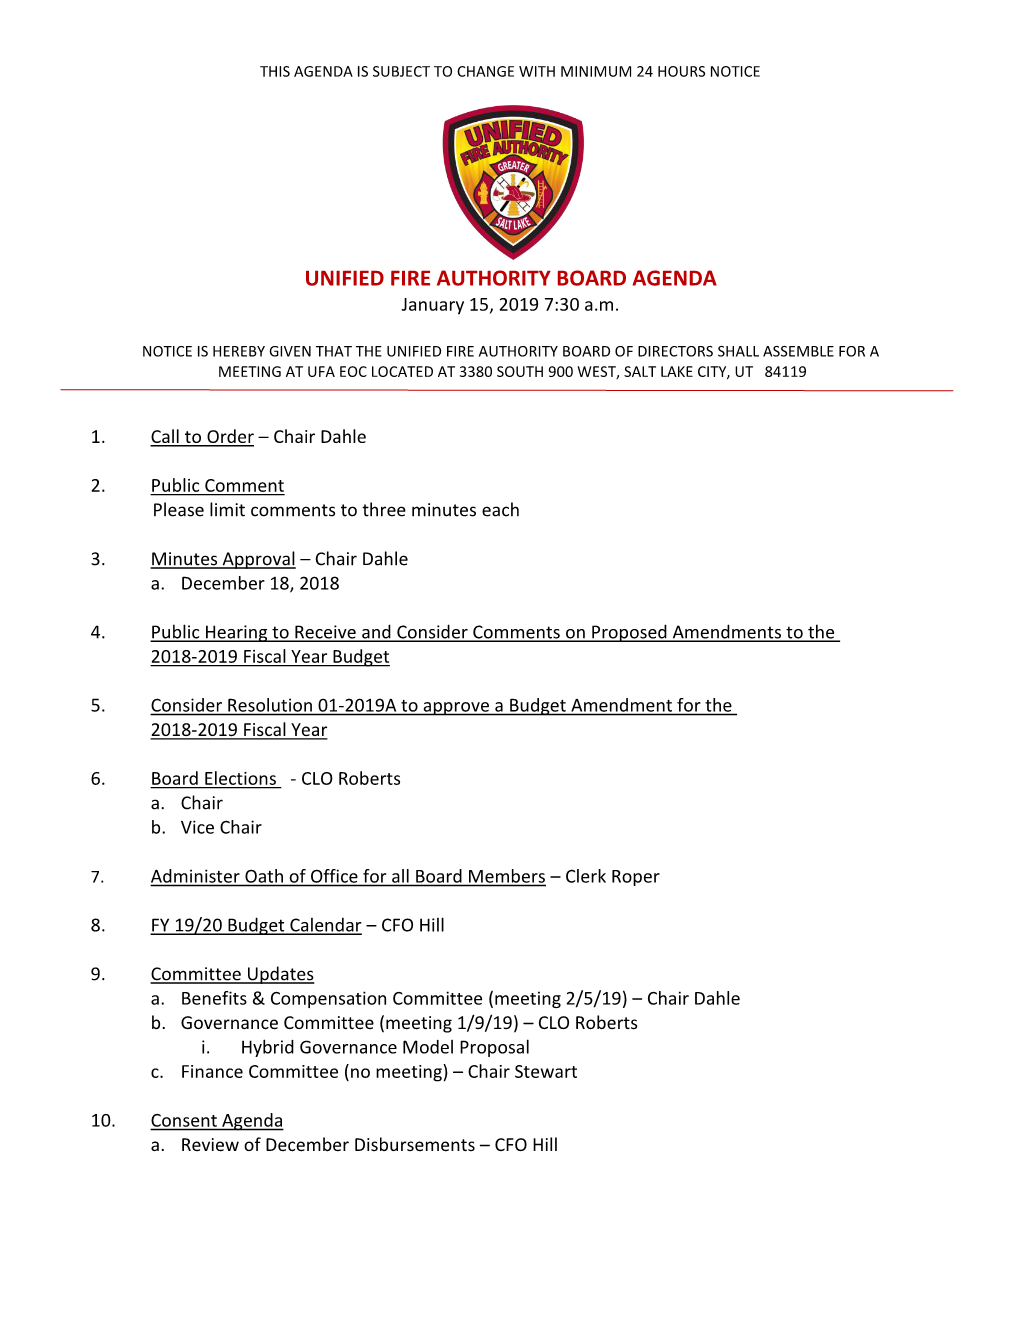 UNIFIED FIRE AUTHORITY BOARD AGENDA January 15, 2019 7:30 A.M